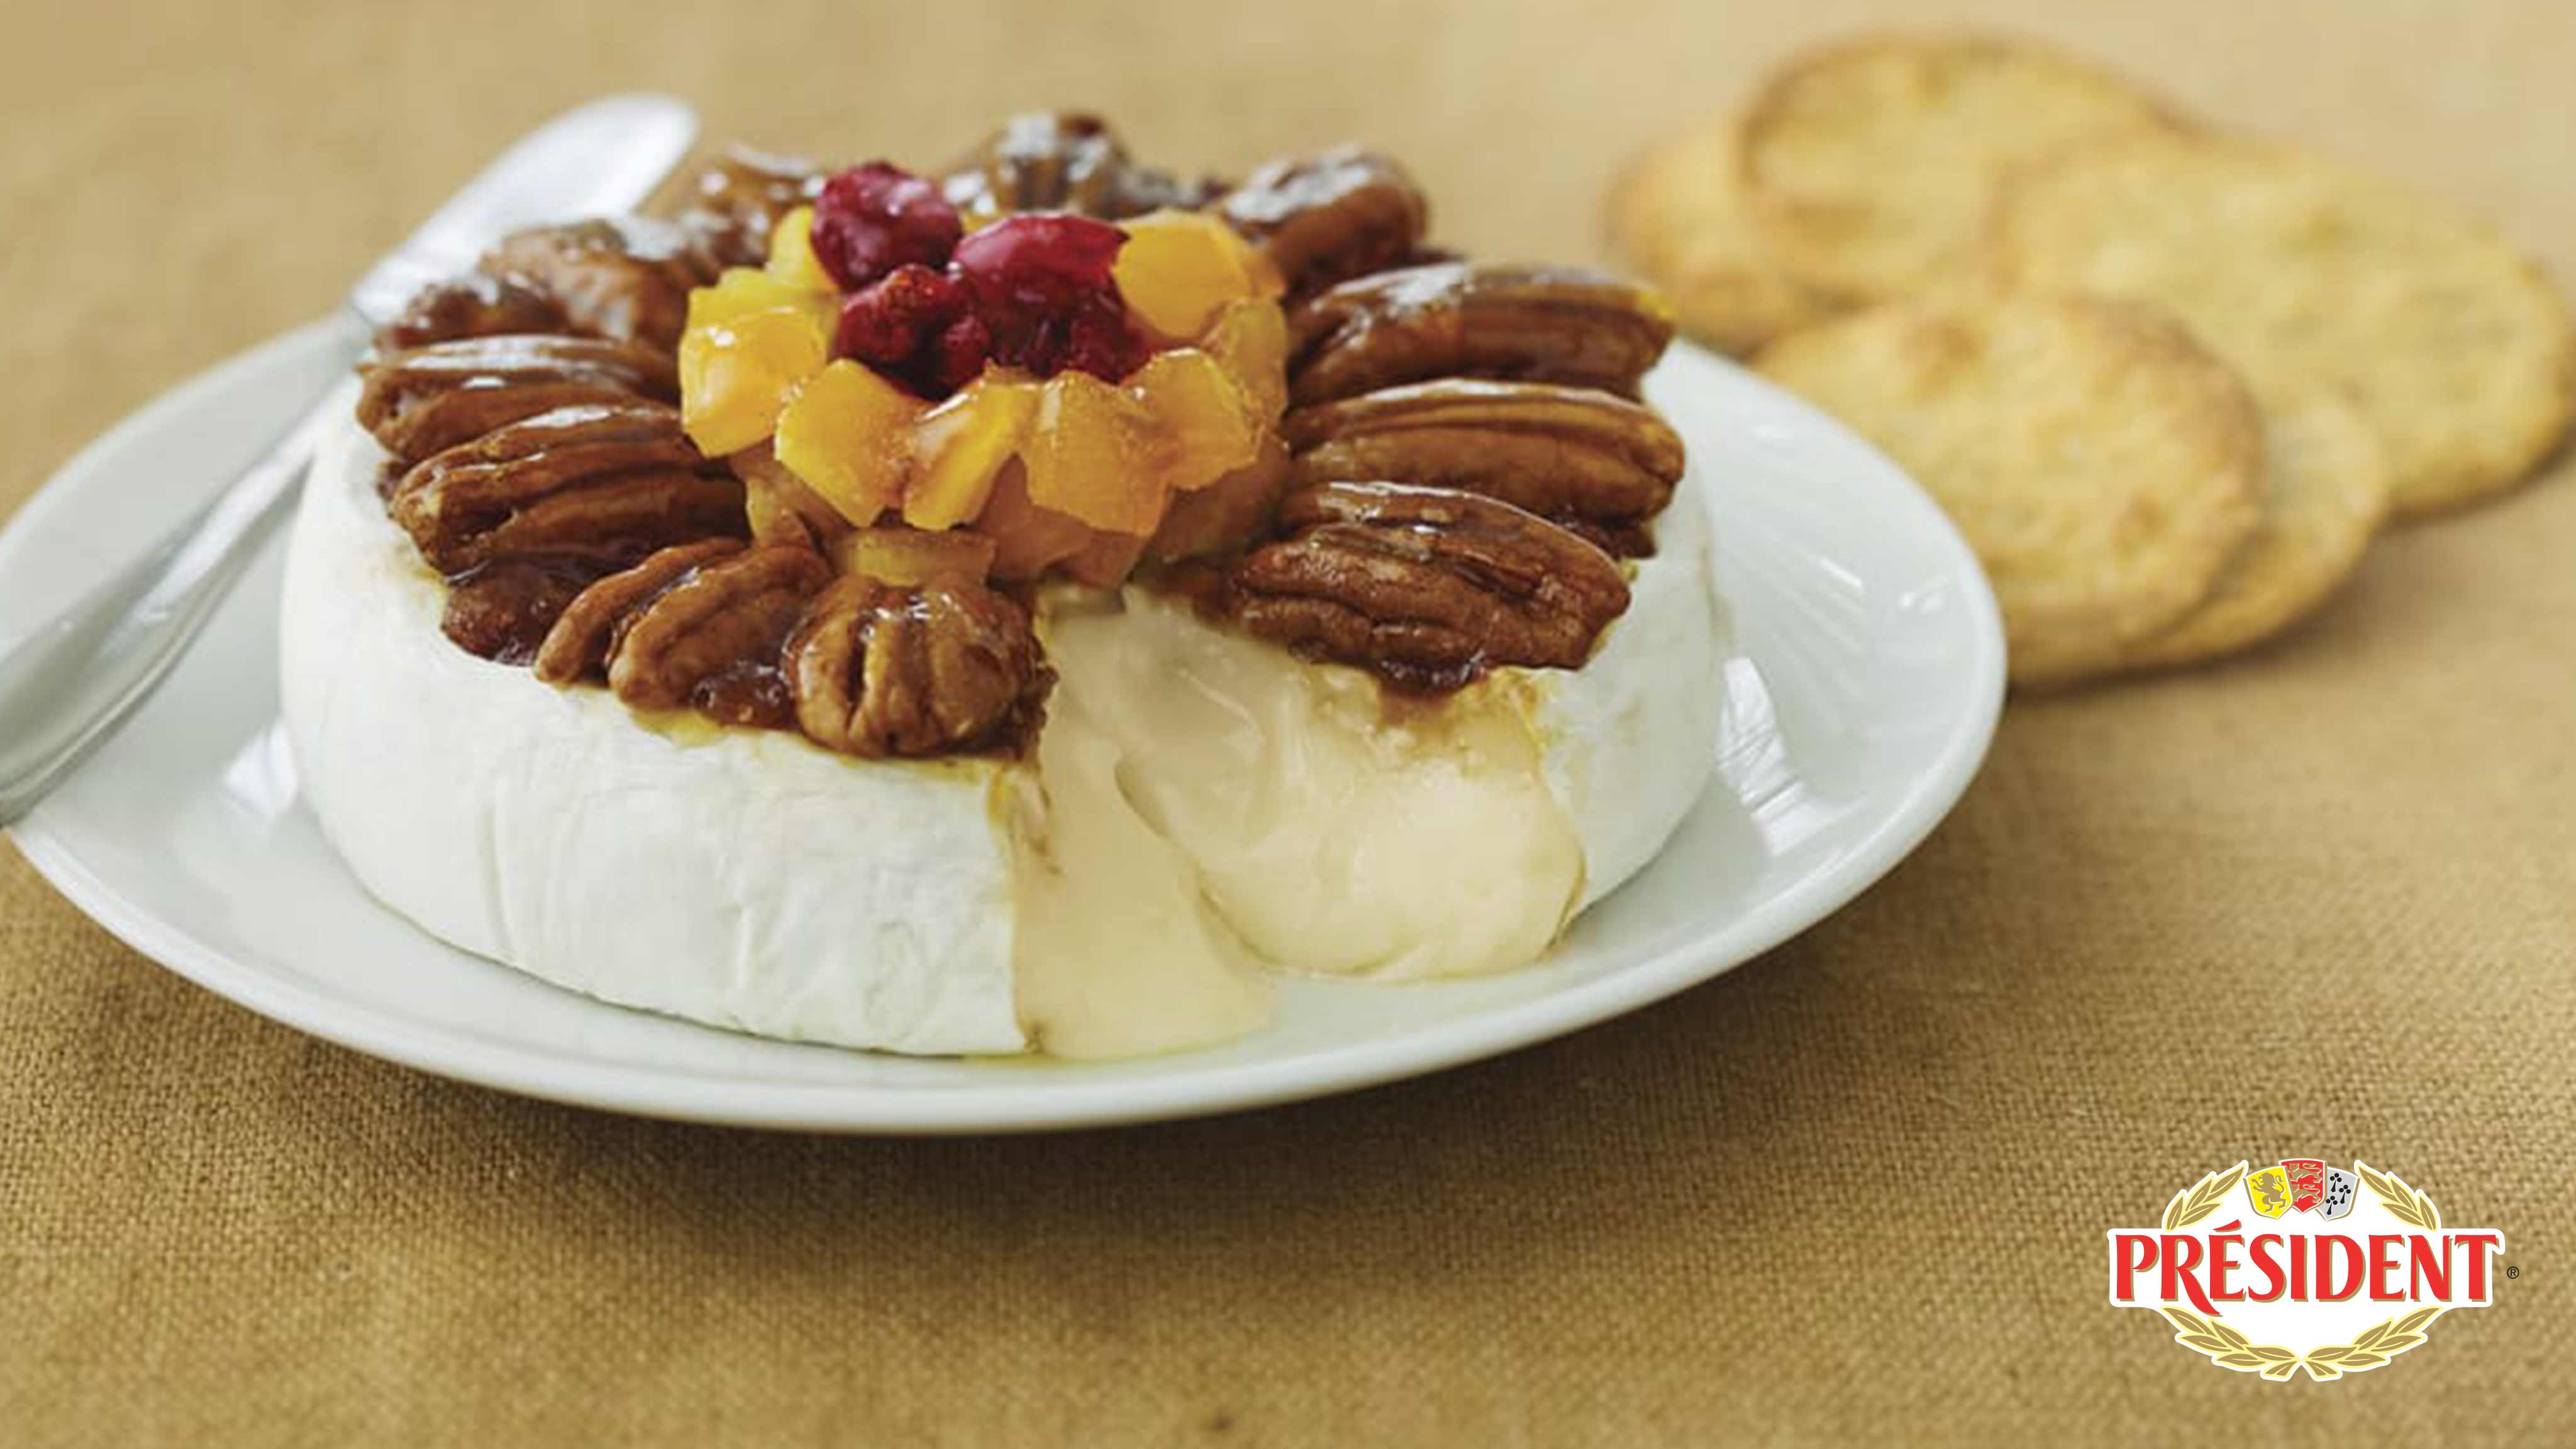 Image for Recipe Baked President Brie with Walnuts and Apricots